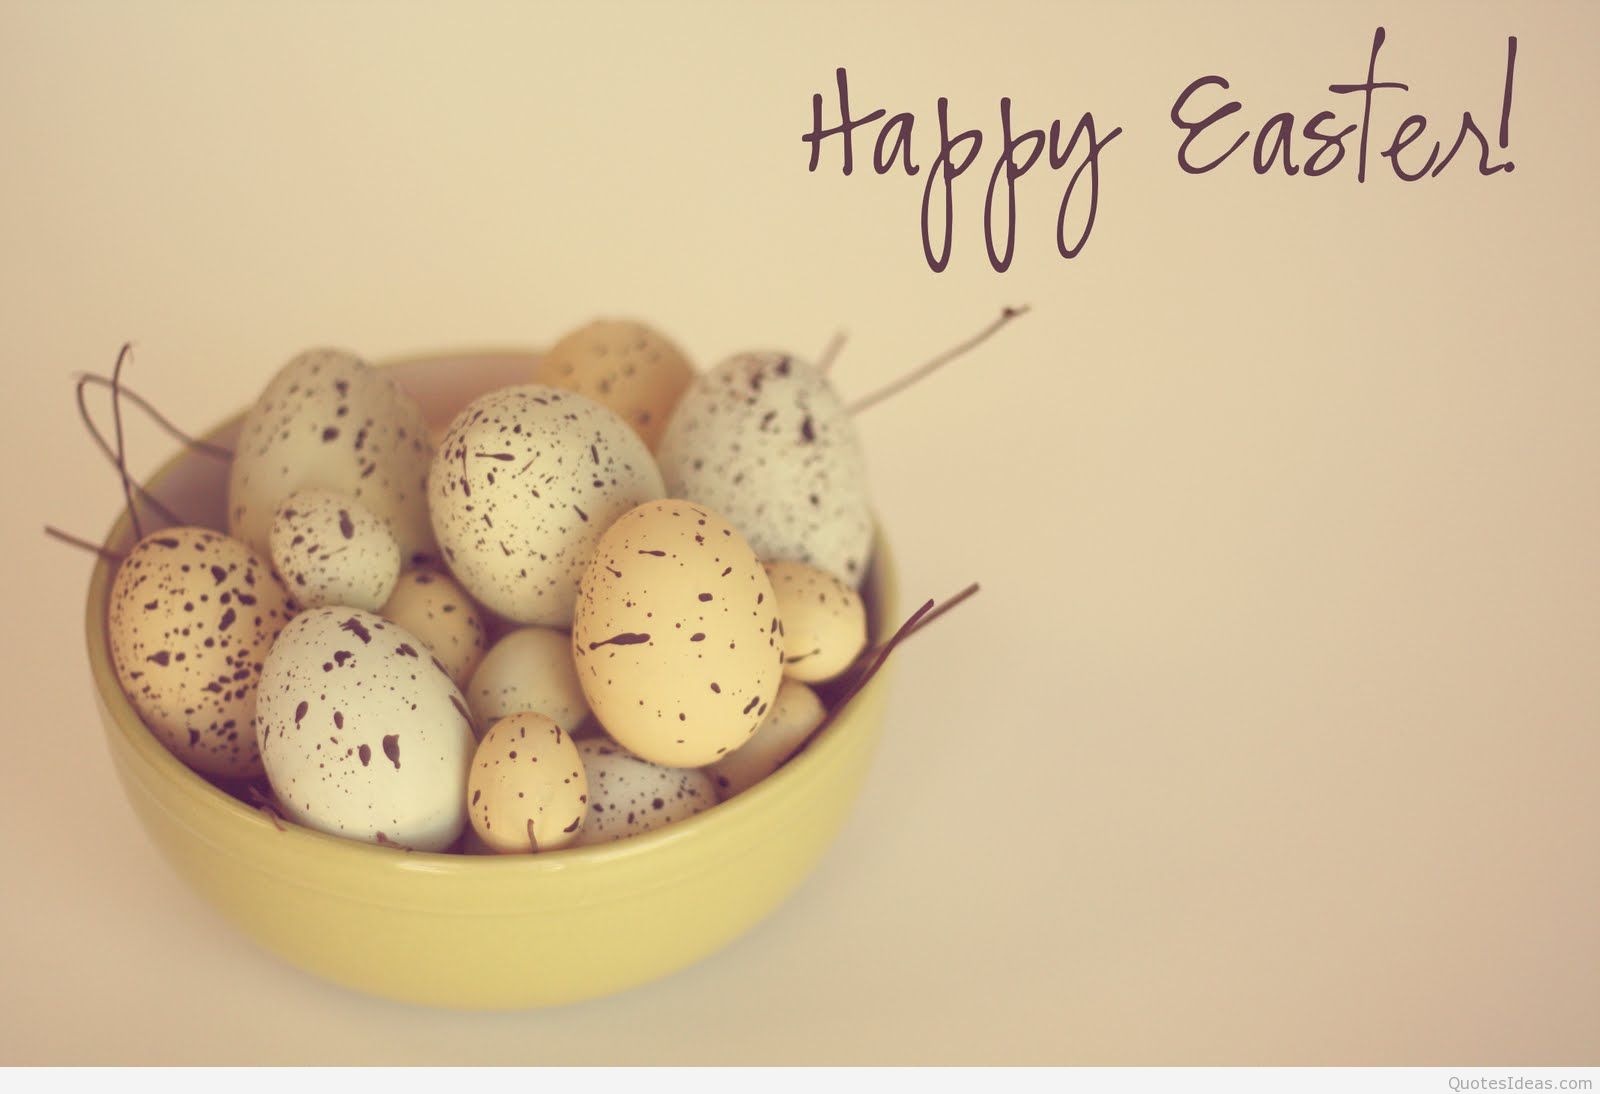 Simple Happy Easter Wallpapers - Simple Happy Easter Wishes - 1600x1094  Wallpaper 